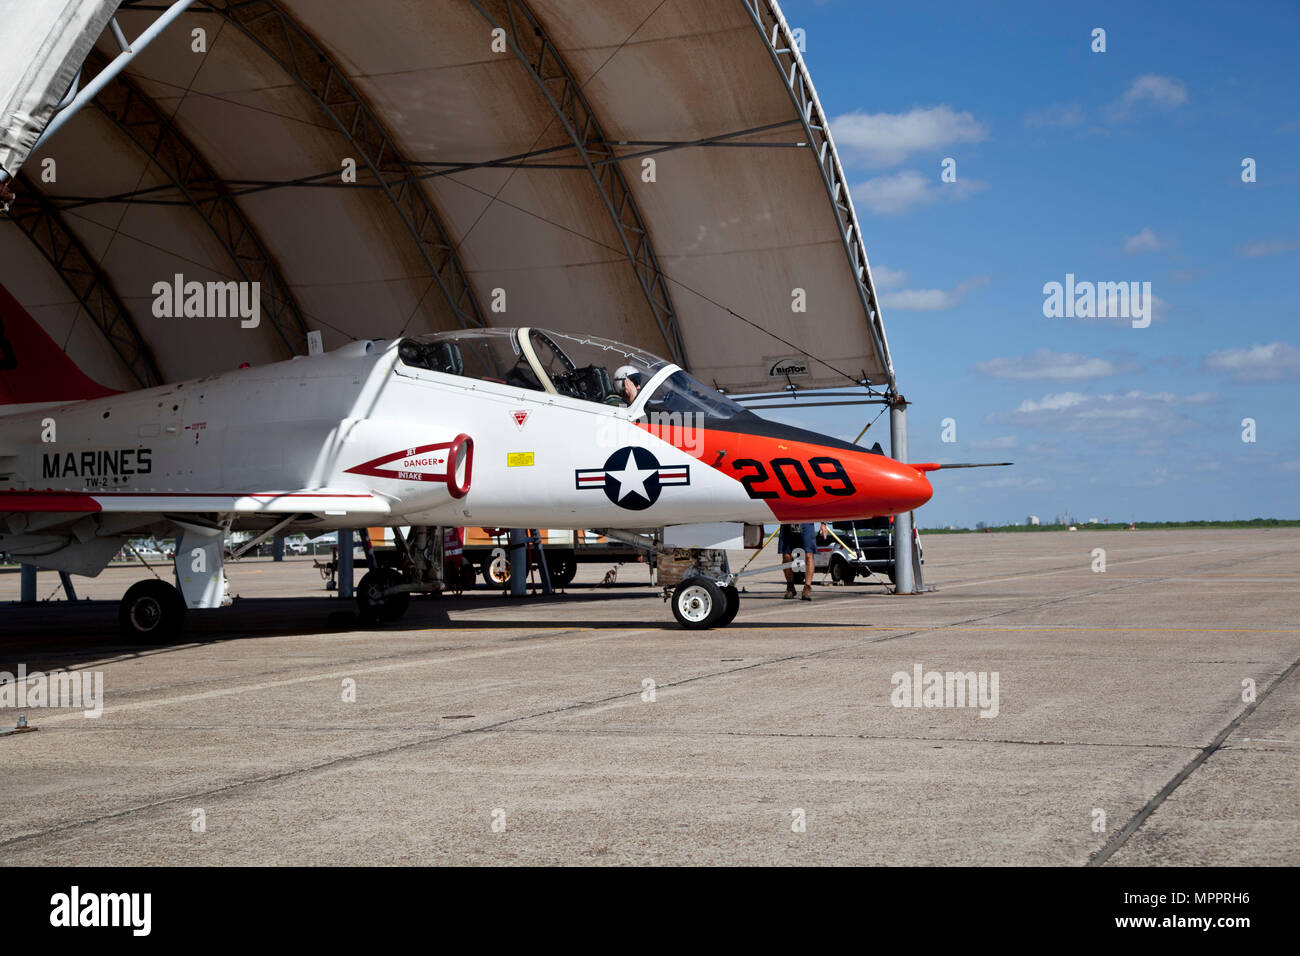 A U.S. Marine Corps officer assigned to the Undergraduate Level Pilot Training course, Training Air Wing Two, prepares to take off on a T-45C training aircraft at Naval Air Station Kingsville, Texas, March 21, 2017. The mission of Training Air Wing Two is to provide undergraduate level pilot training for Marines to prepare them for the Fleet Marine Force. (U.S. Marine Corps photo by Lance Cpl. Jose Villalobosrocha) Stock Photo